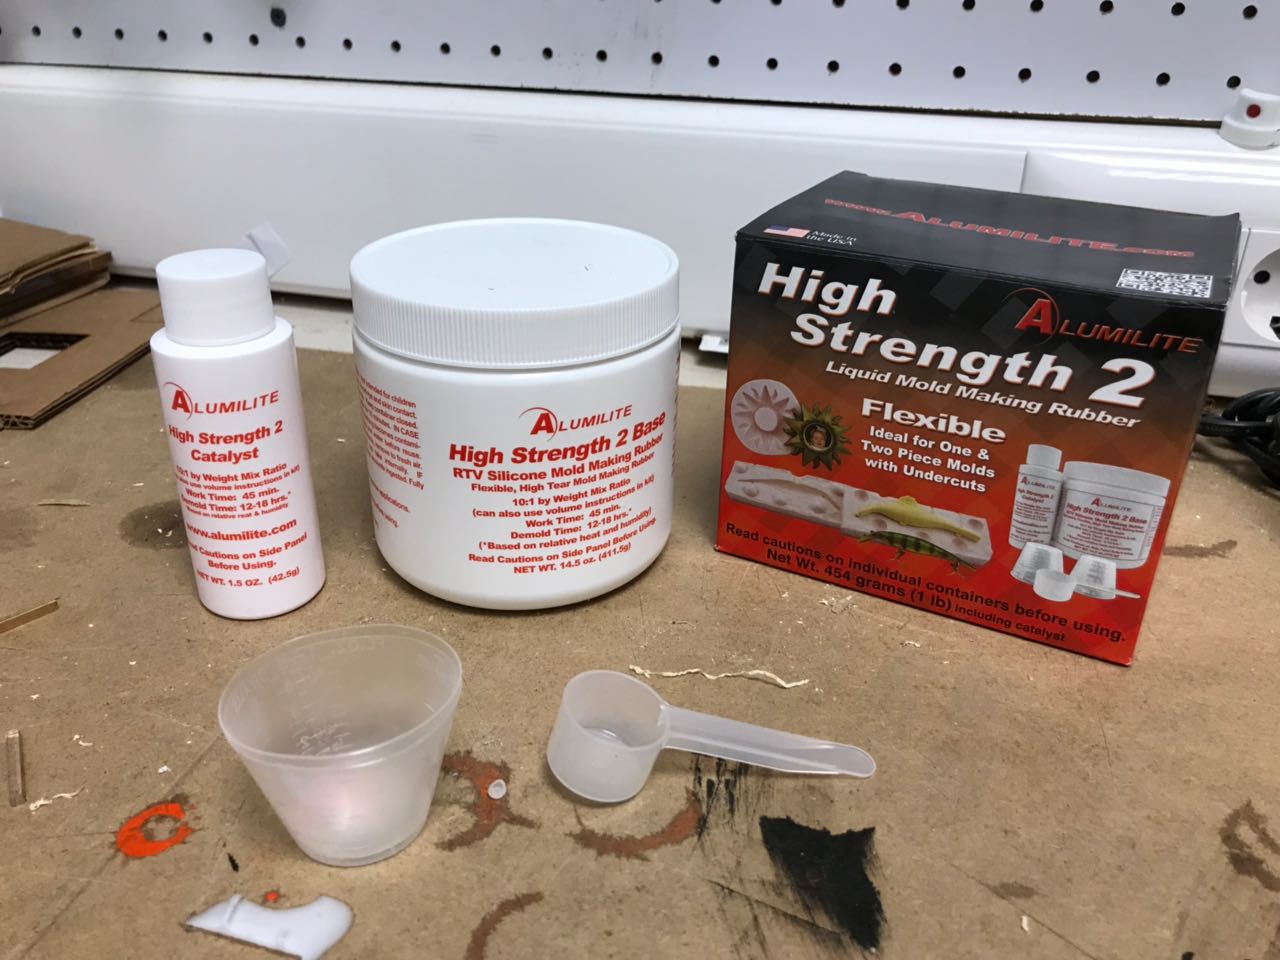 Alumilite High Strength 2 mold making silicone